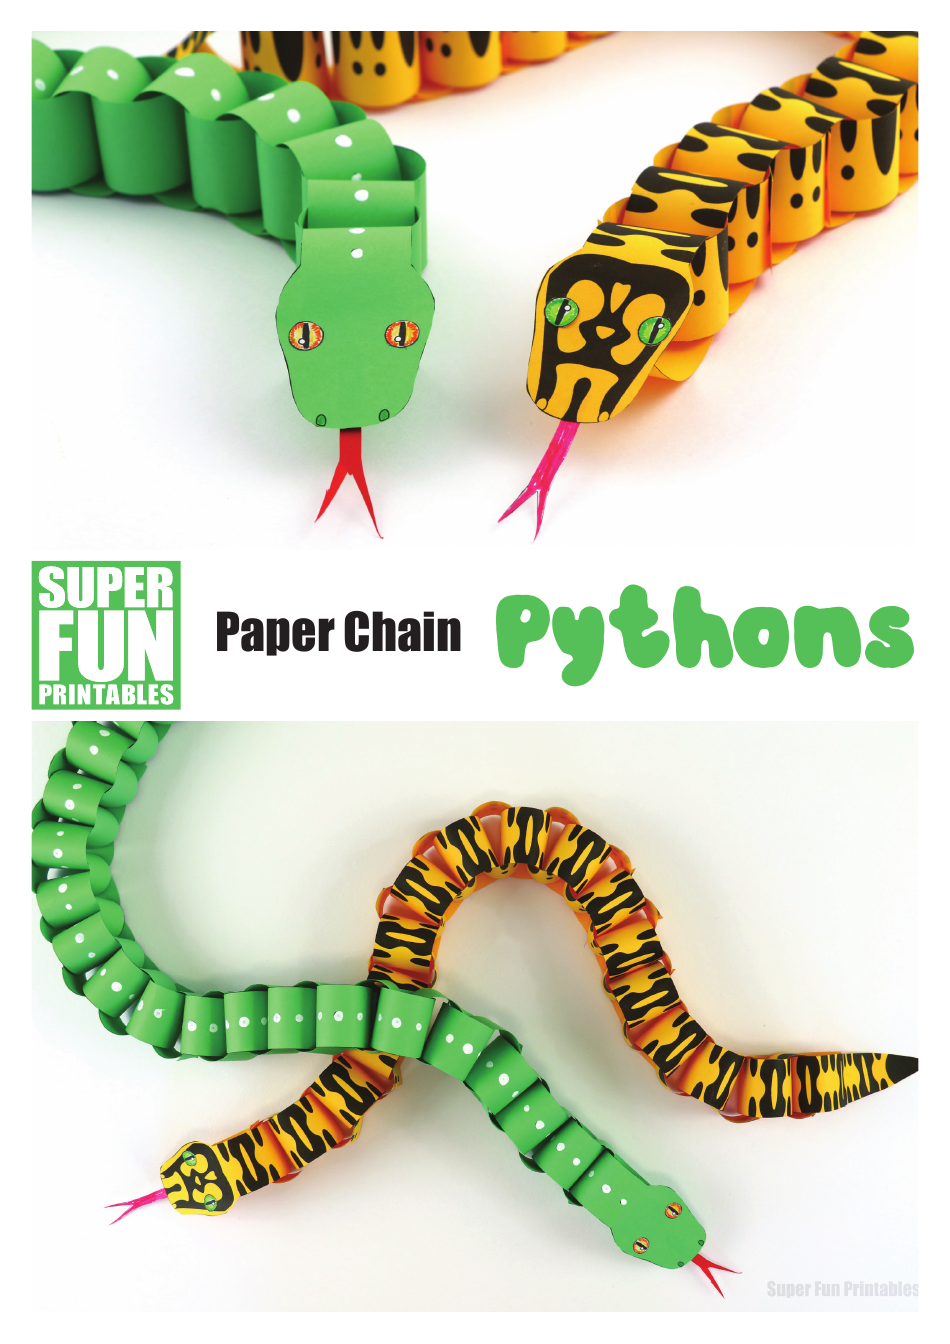 Python-themed paper chain templates